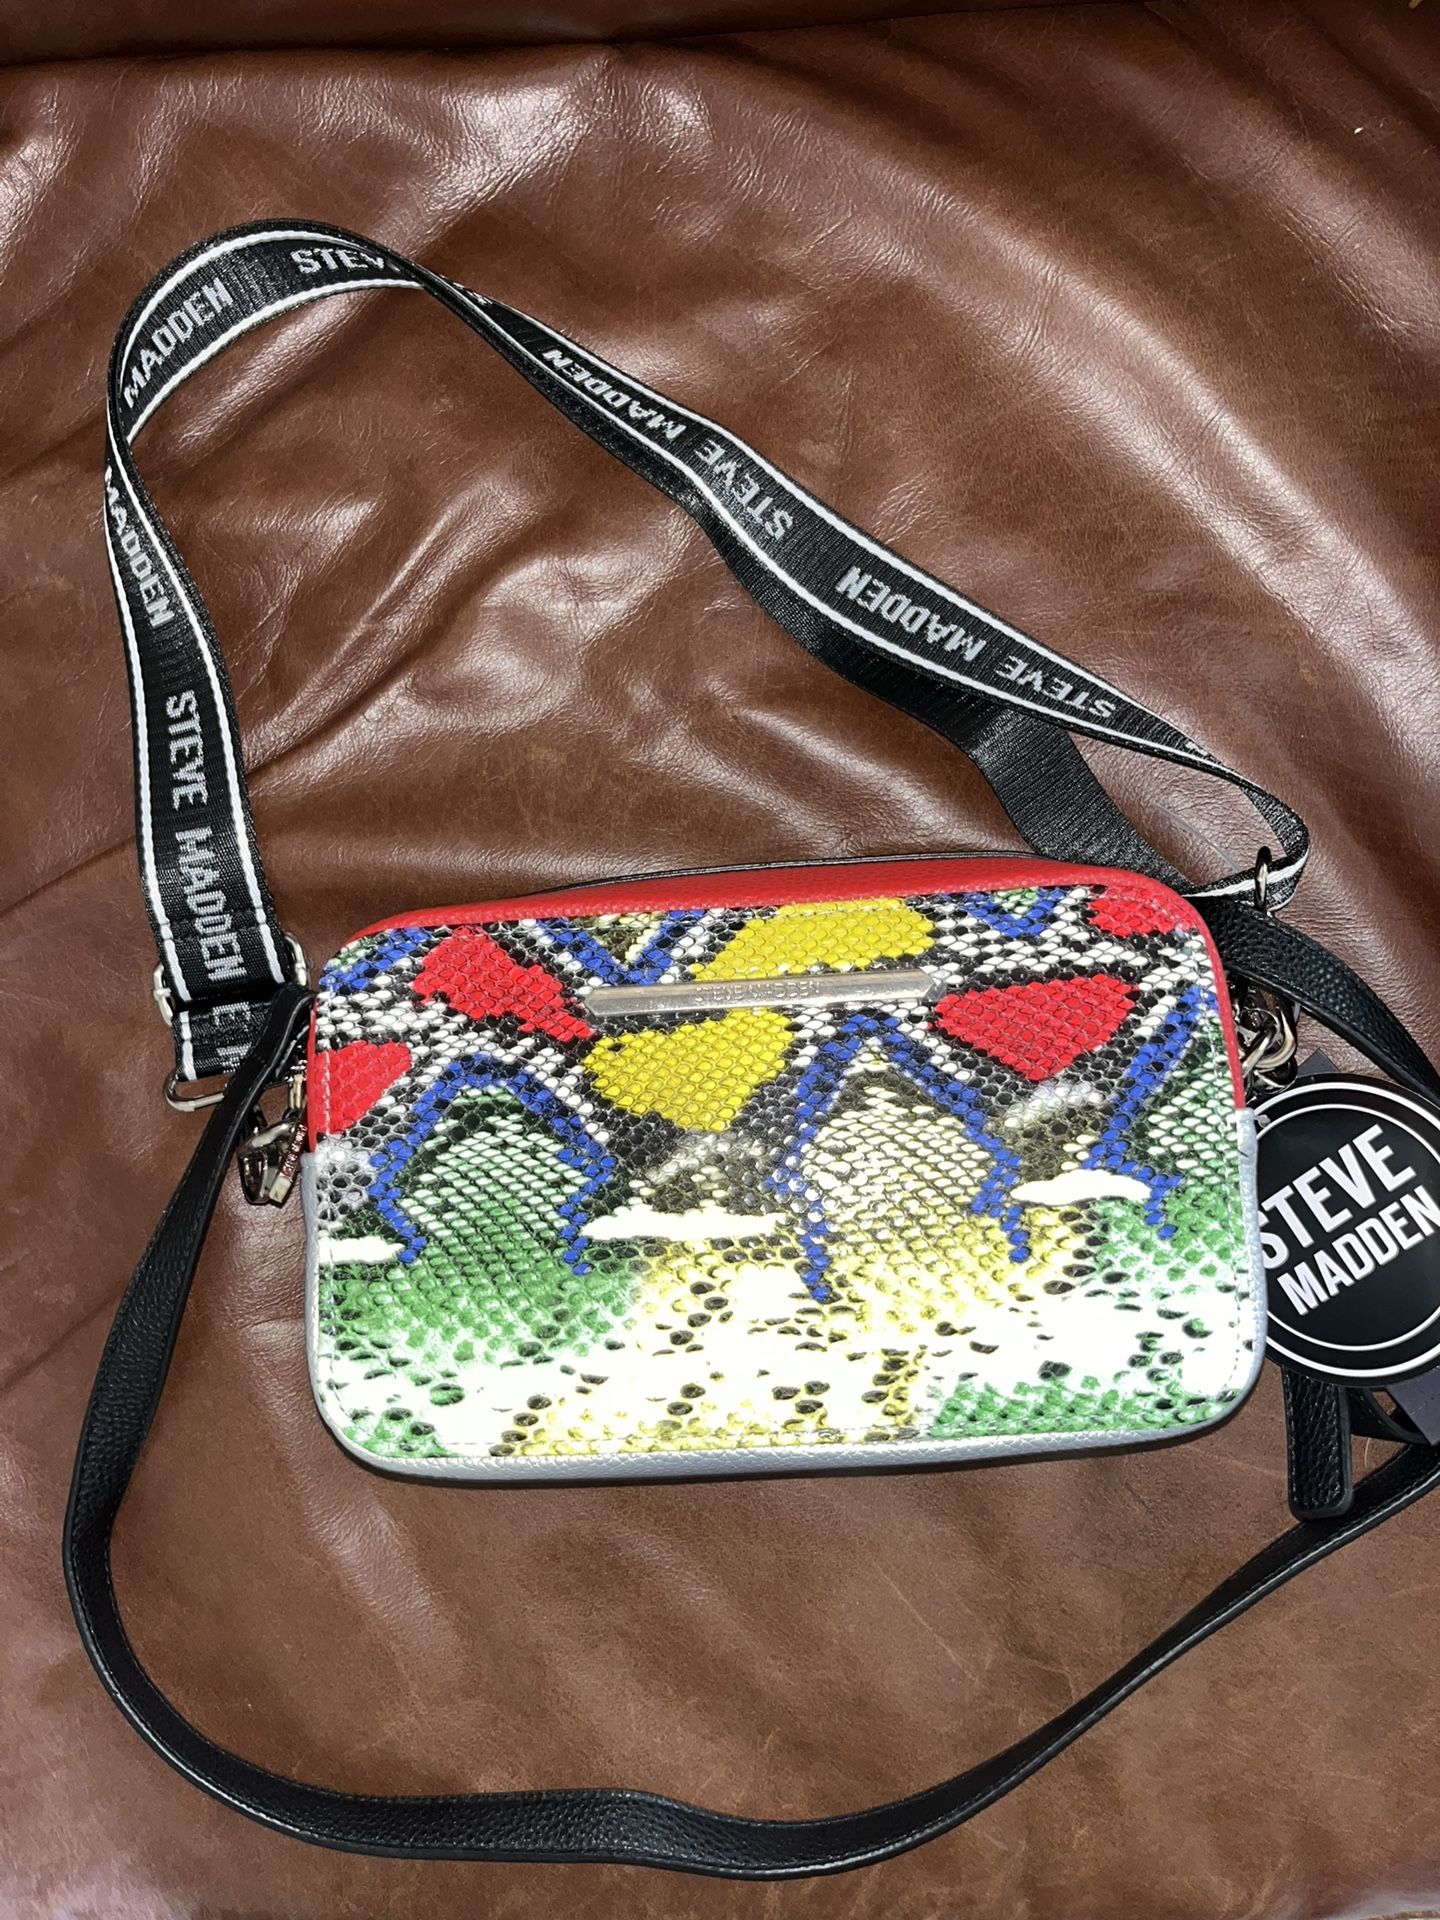 Steve Madden Crossbody Purse for Sale in Port St. Lucie, FL - OfferUp